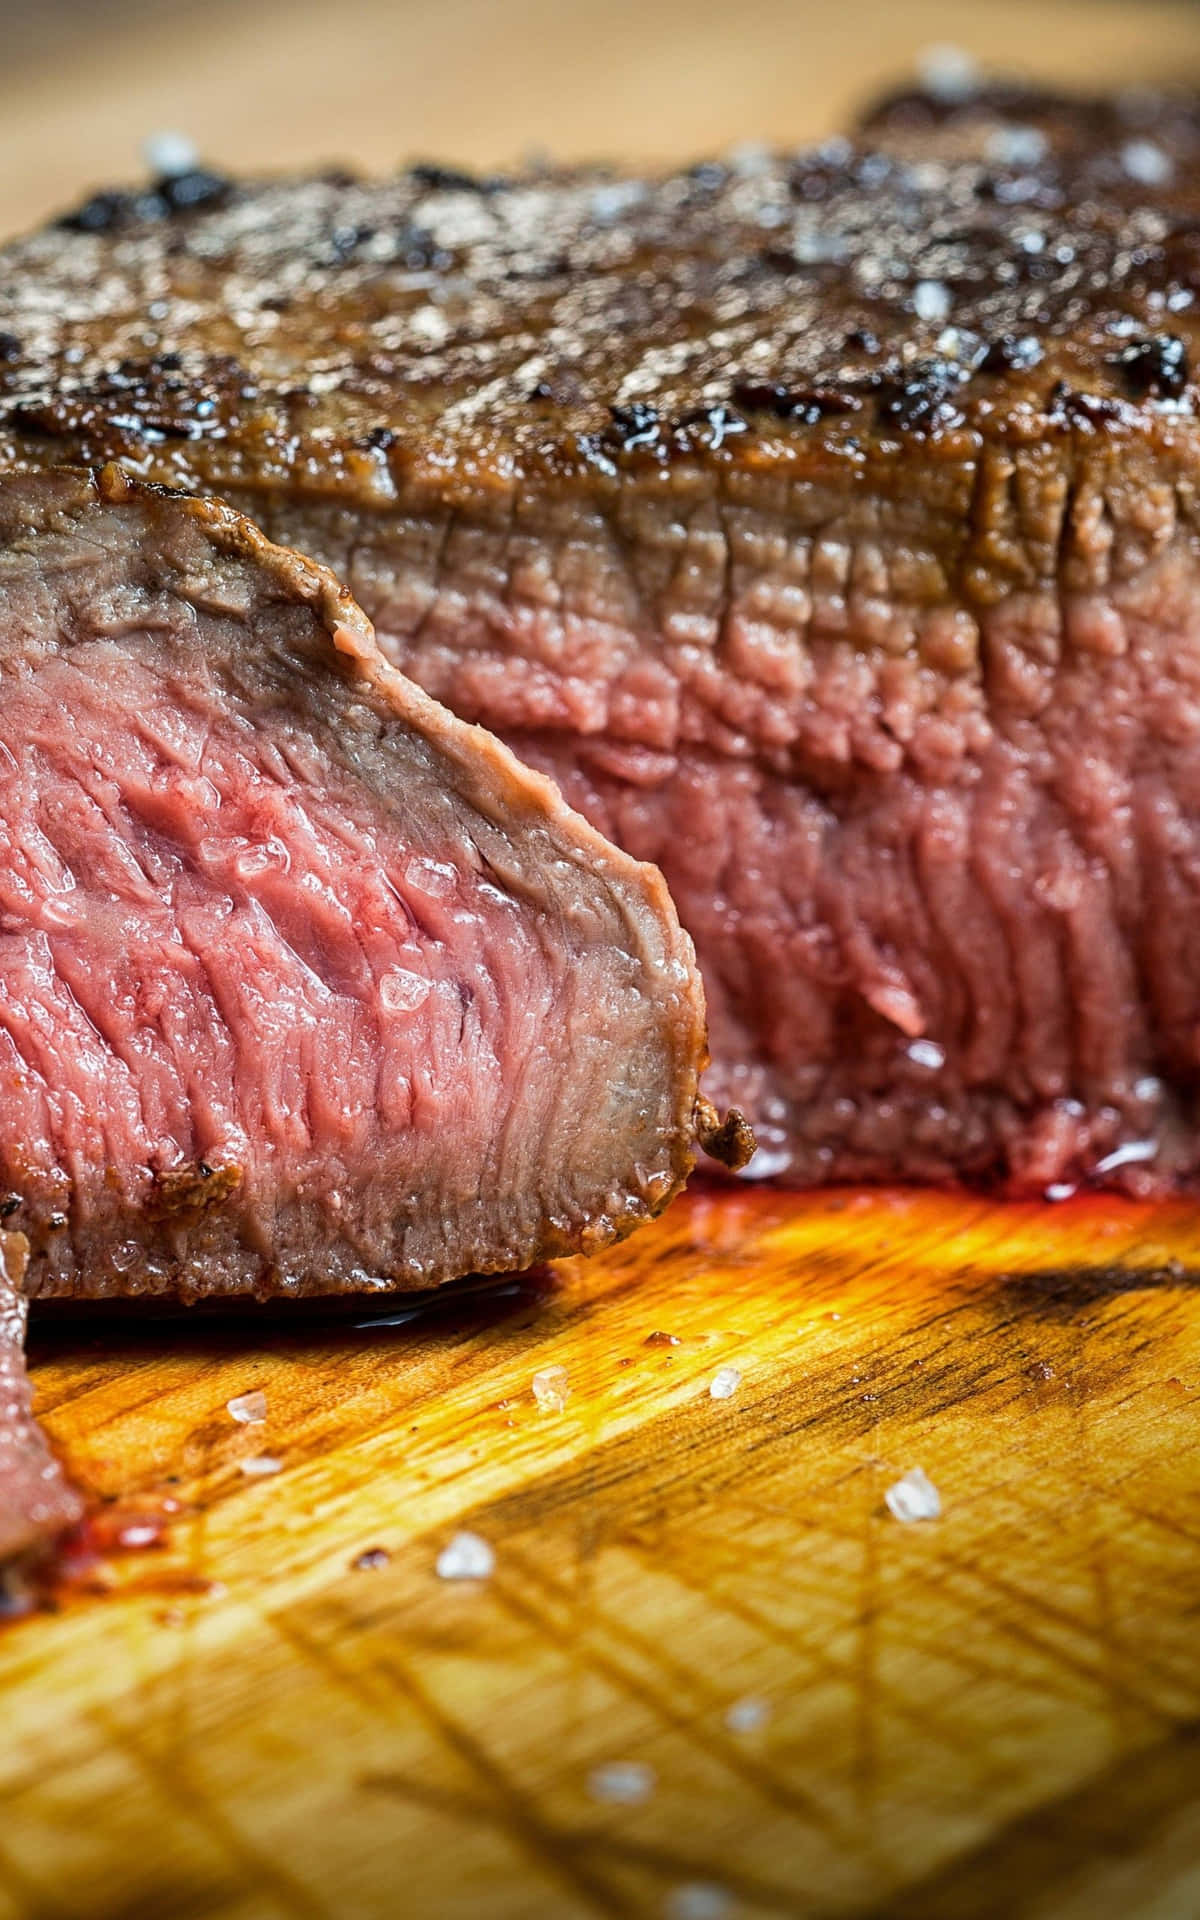 Juicy Grilled Steak, Ready to be Served